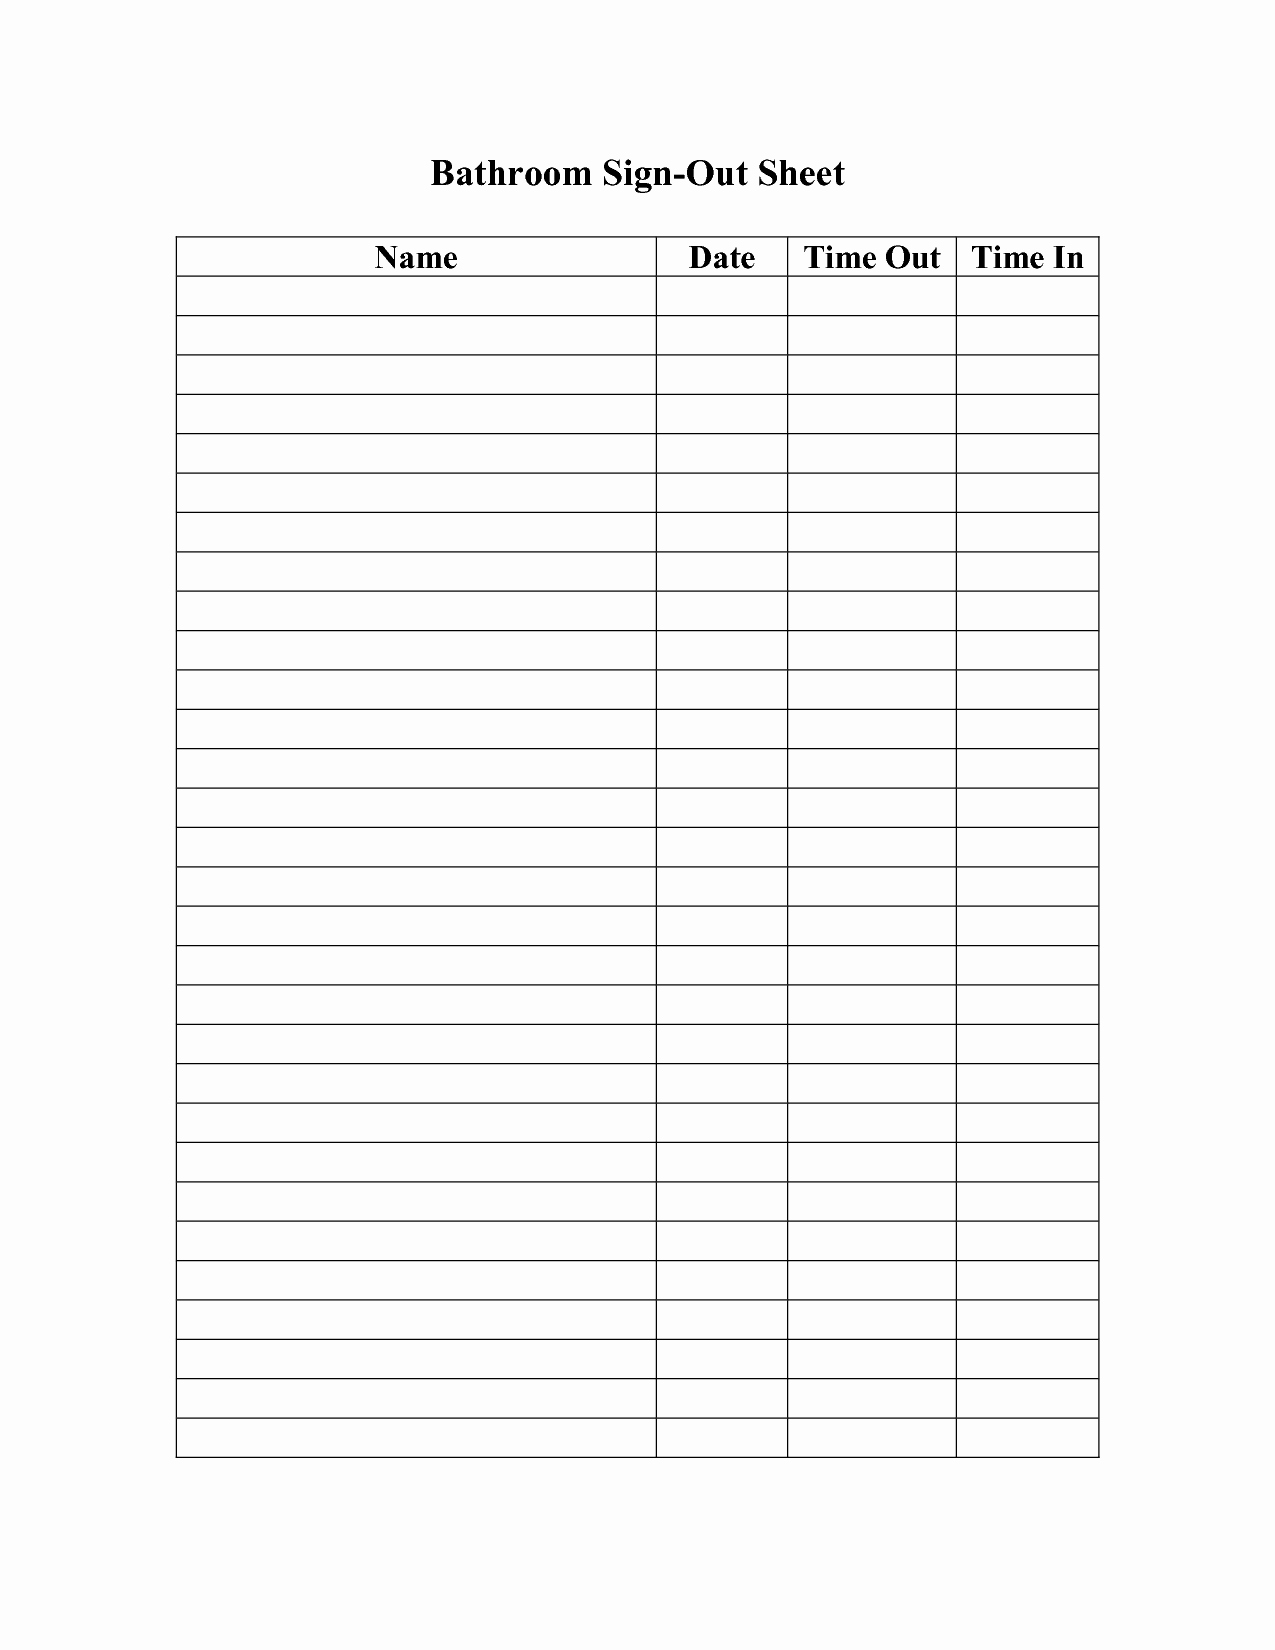 Book Sign Out Sheet Template Best Of 6 Best Of Bathroom Sign Out Sheet Printable